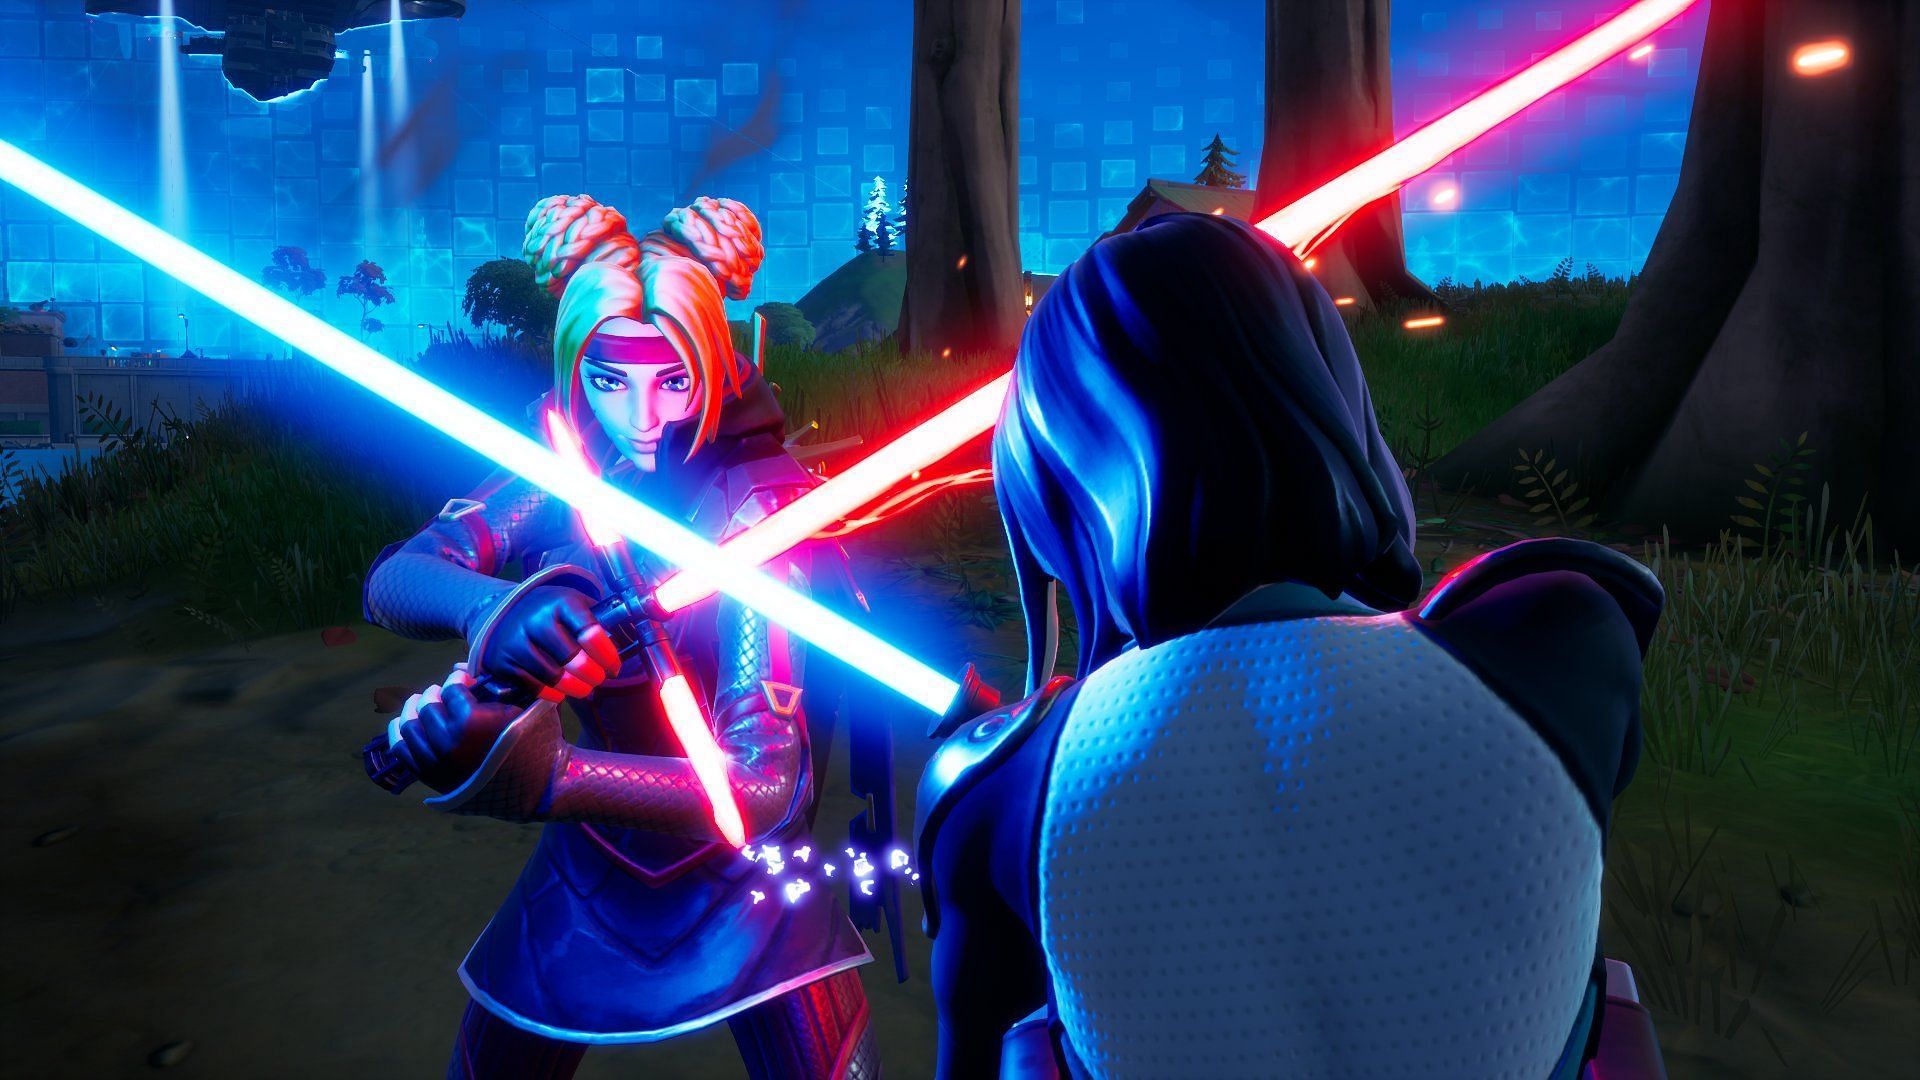 New Star Wars skins are coming to Fortnite soon (Image via Twitter/guardiaonice_yt)